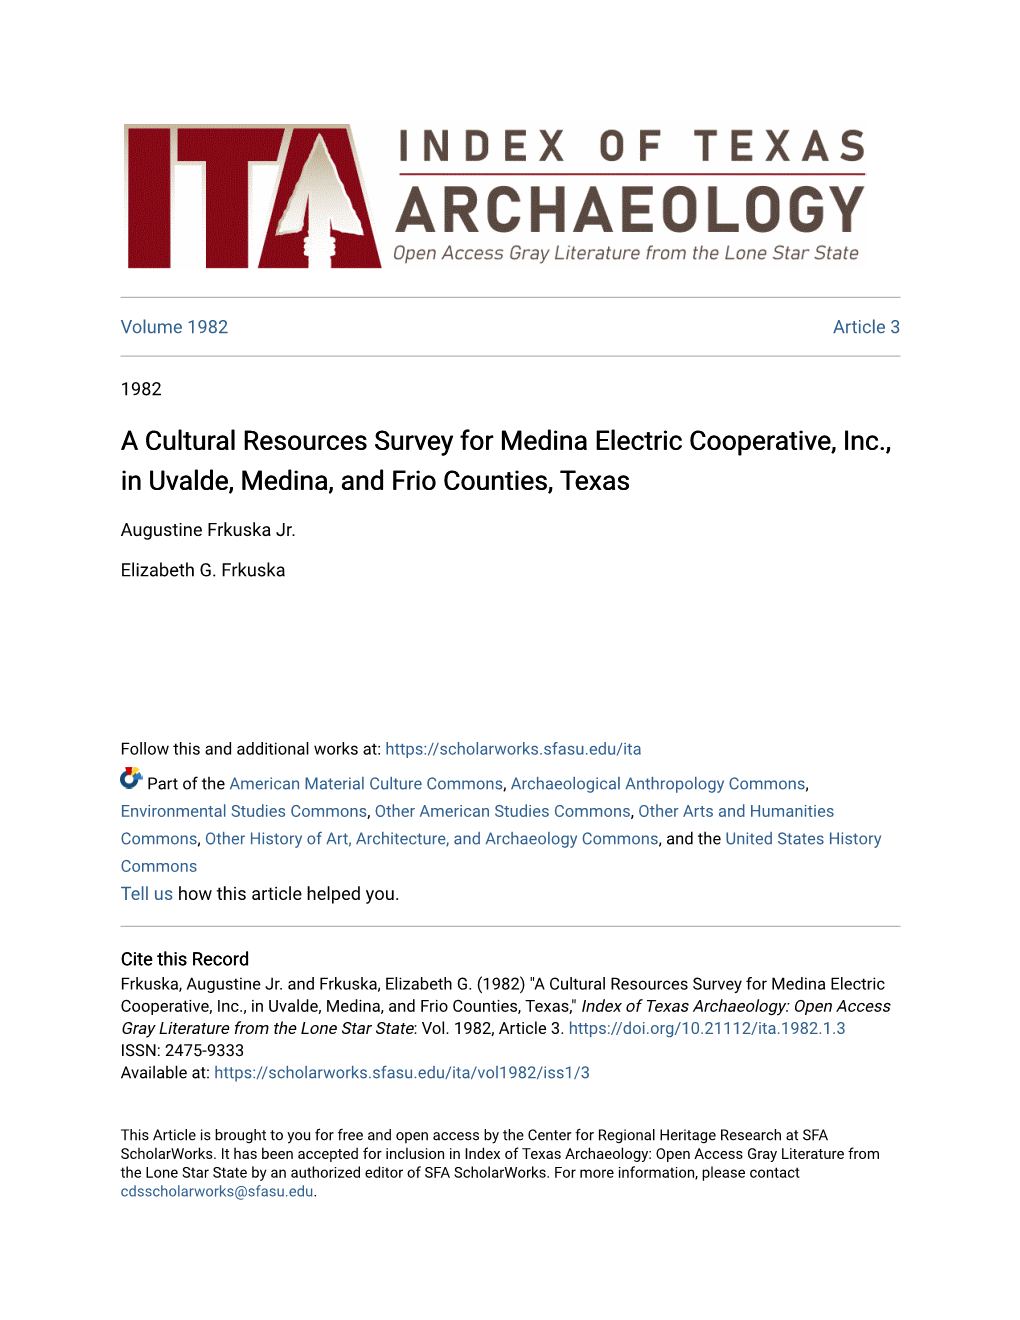 A Cultural Resources Survey for Medina Electric Cooperative, Inc., in Uvalde, Medina, and Frio Counties, Texas